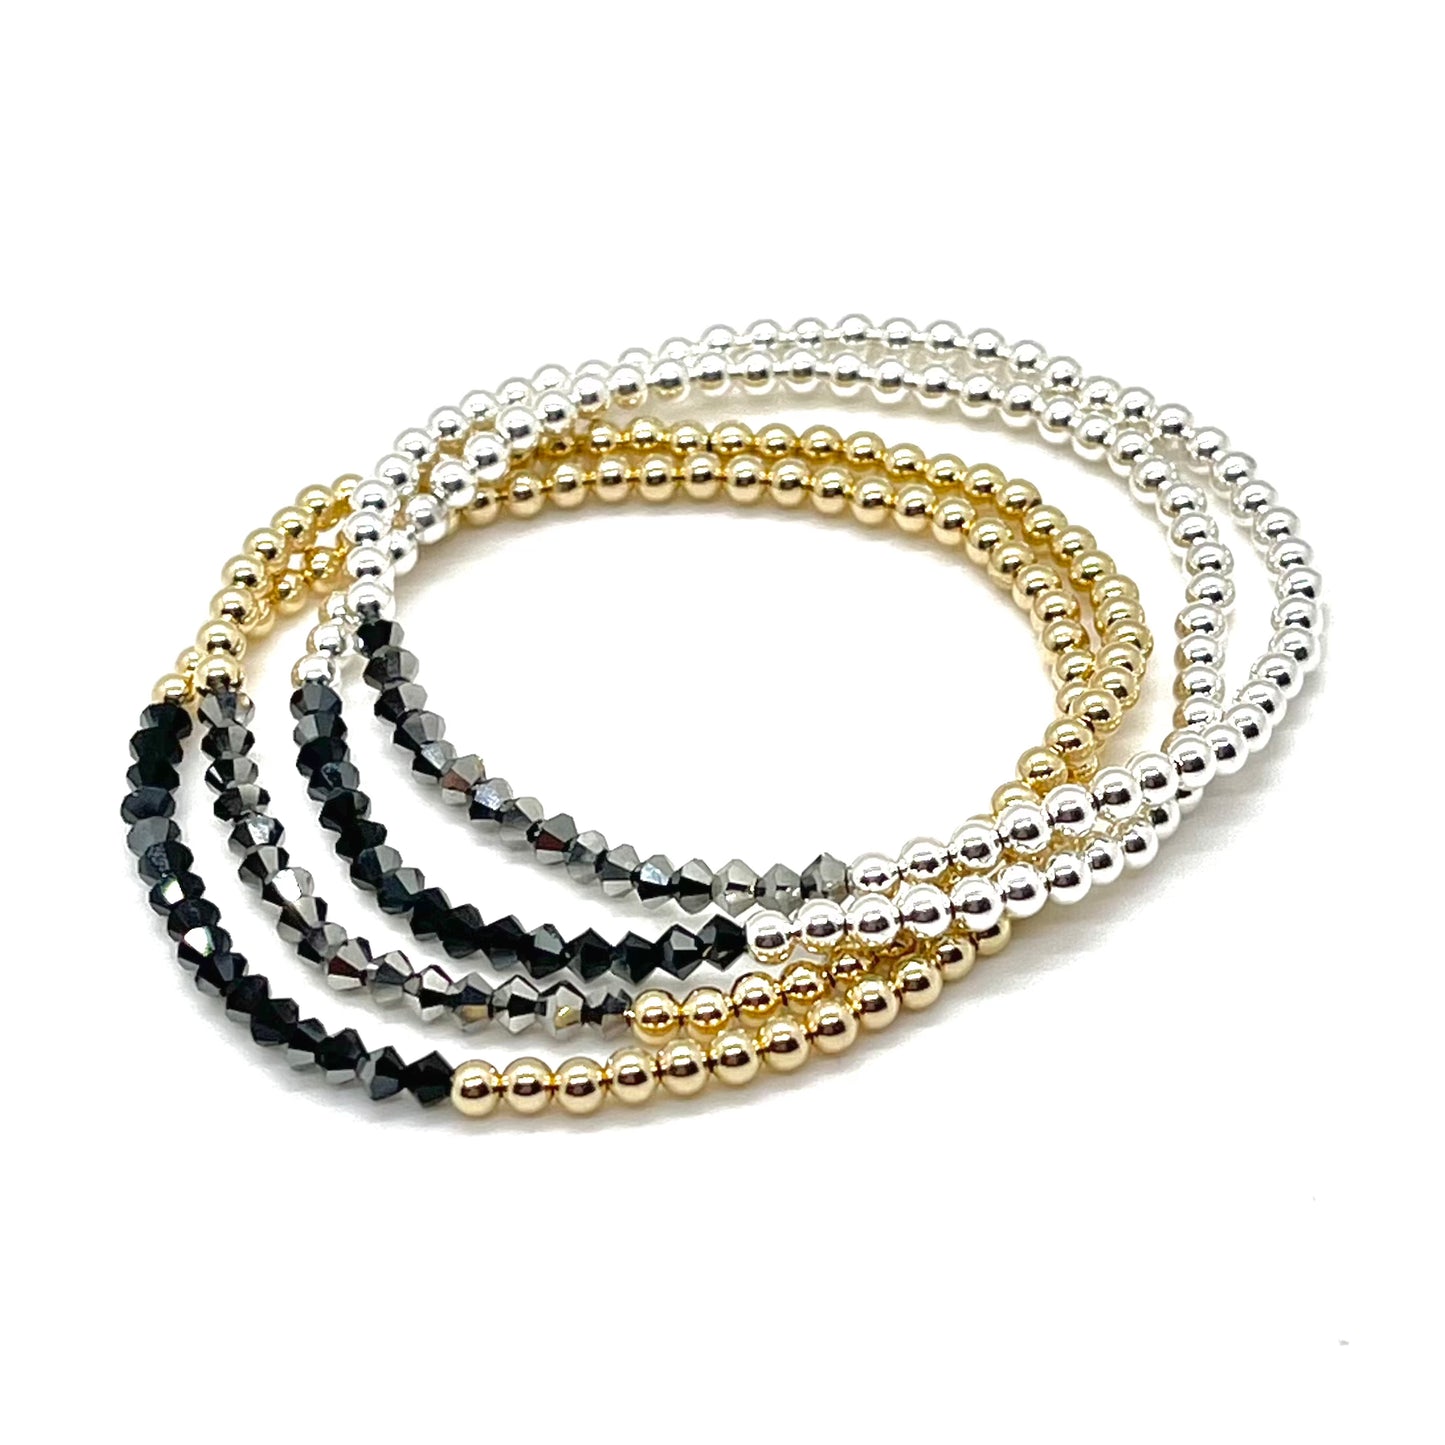 Gold and silver 3mm bead bracelets with black and hematite diamond-shape crystals on stretch cord.